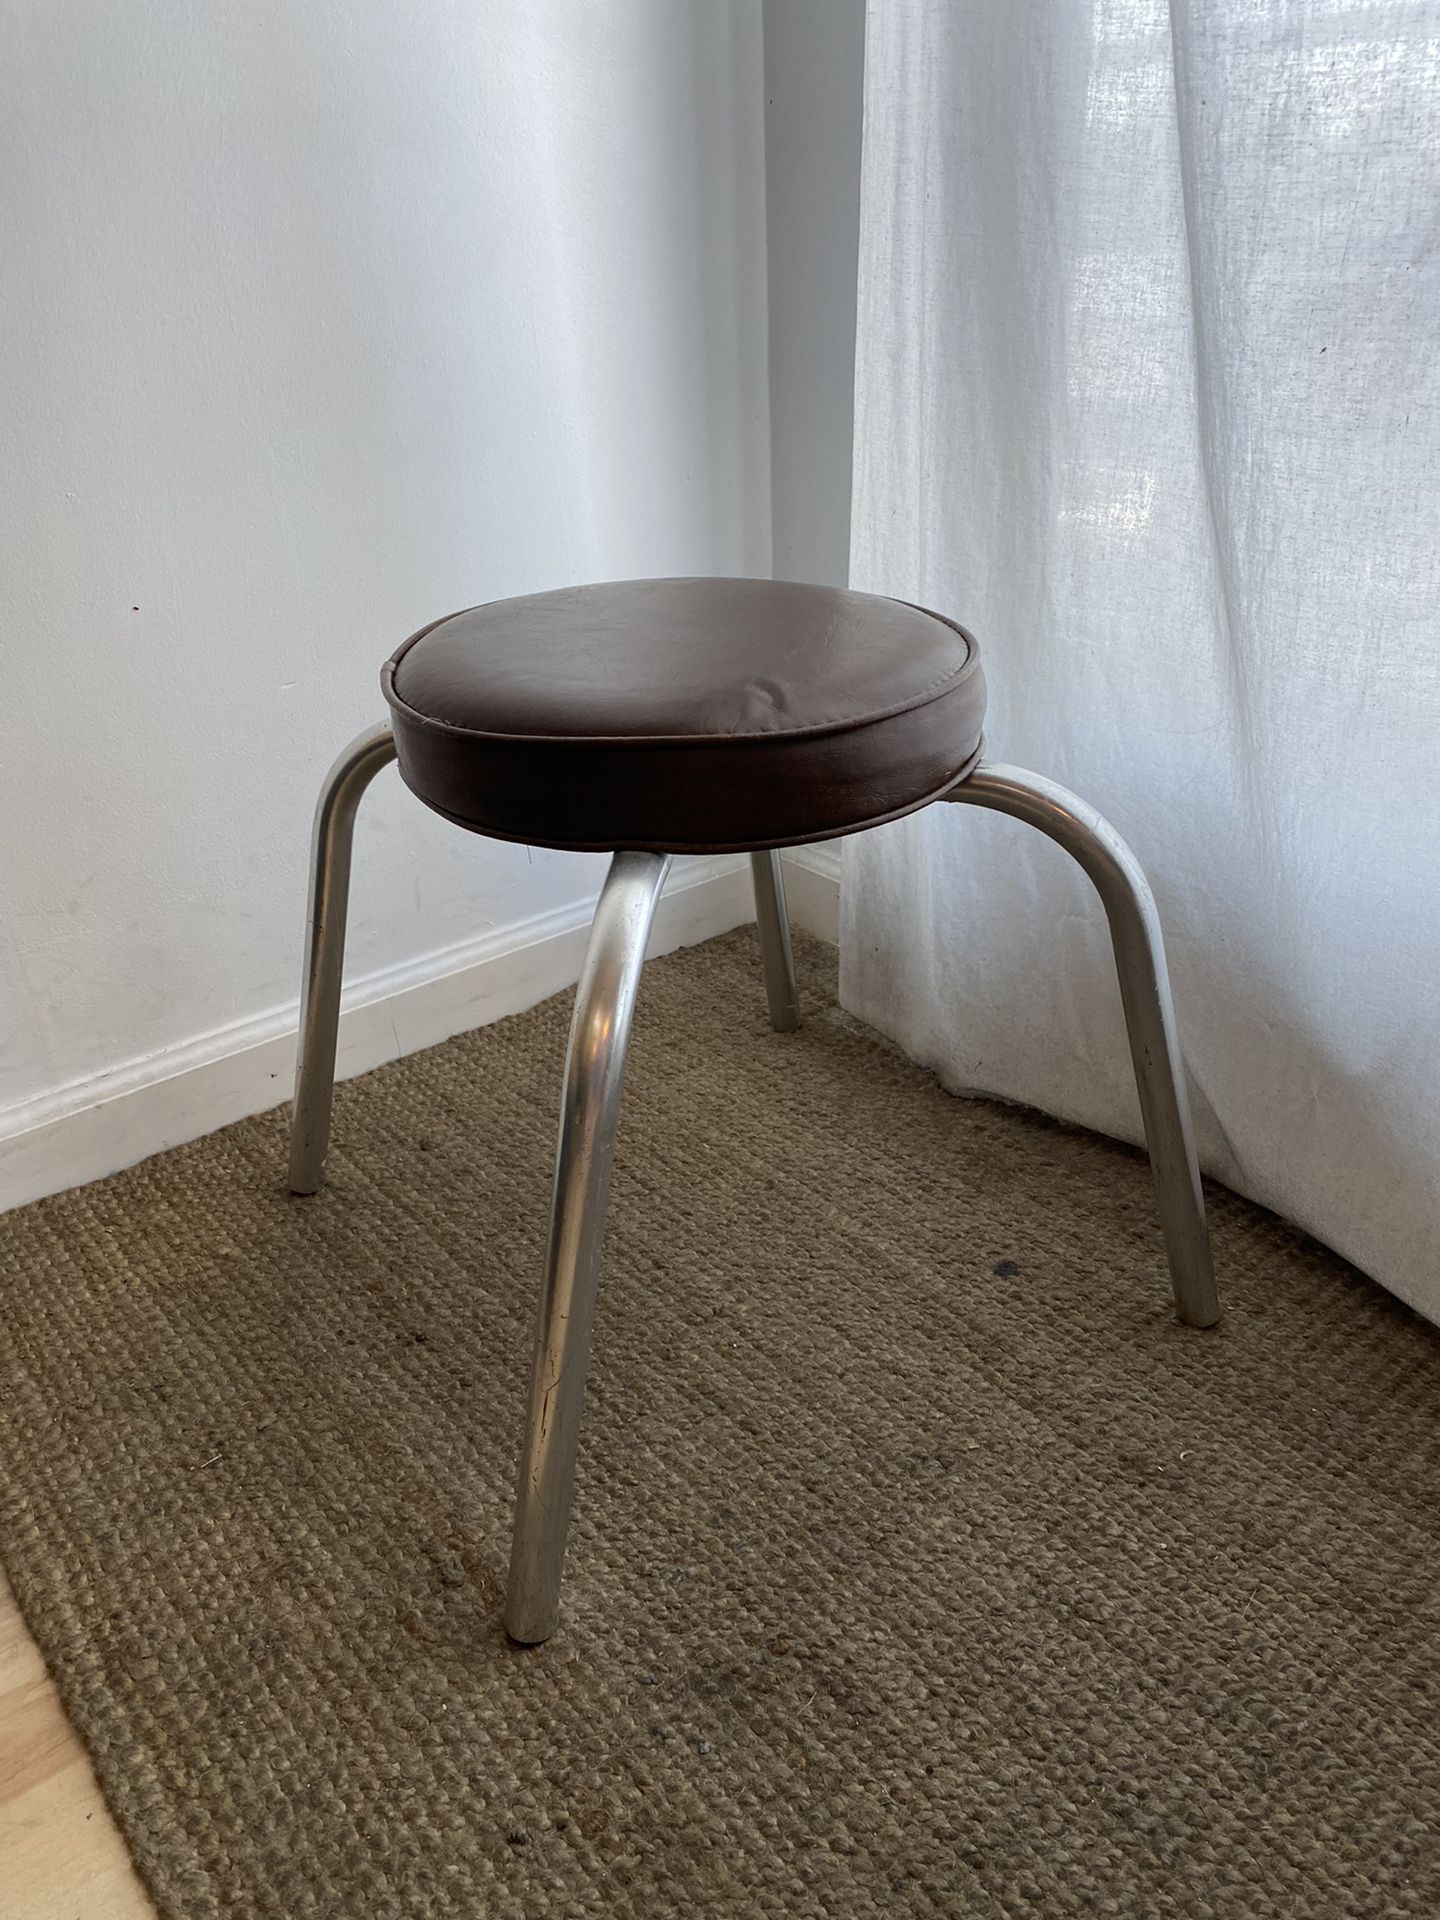 small stool/ottoman - need gone by 8.29